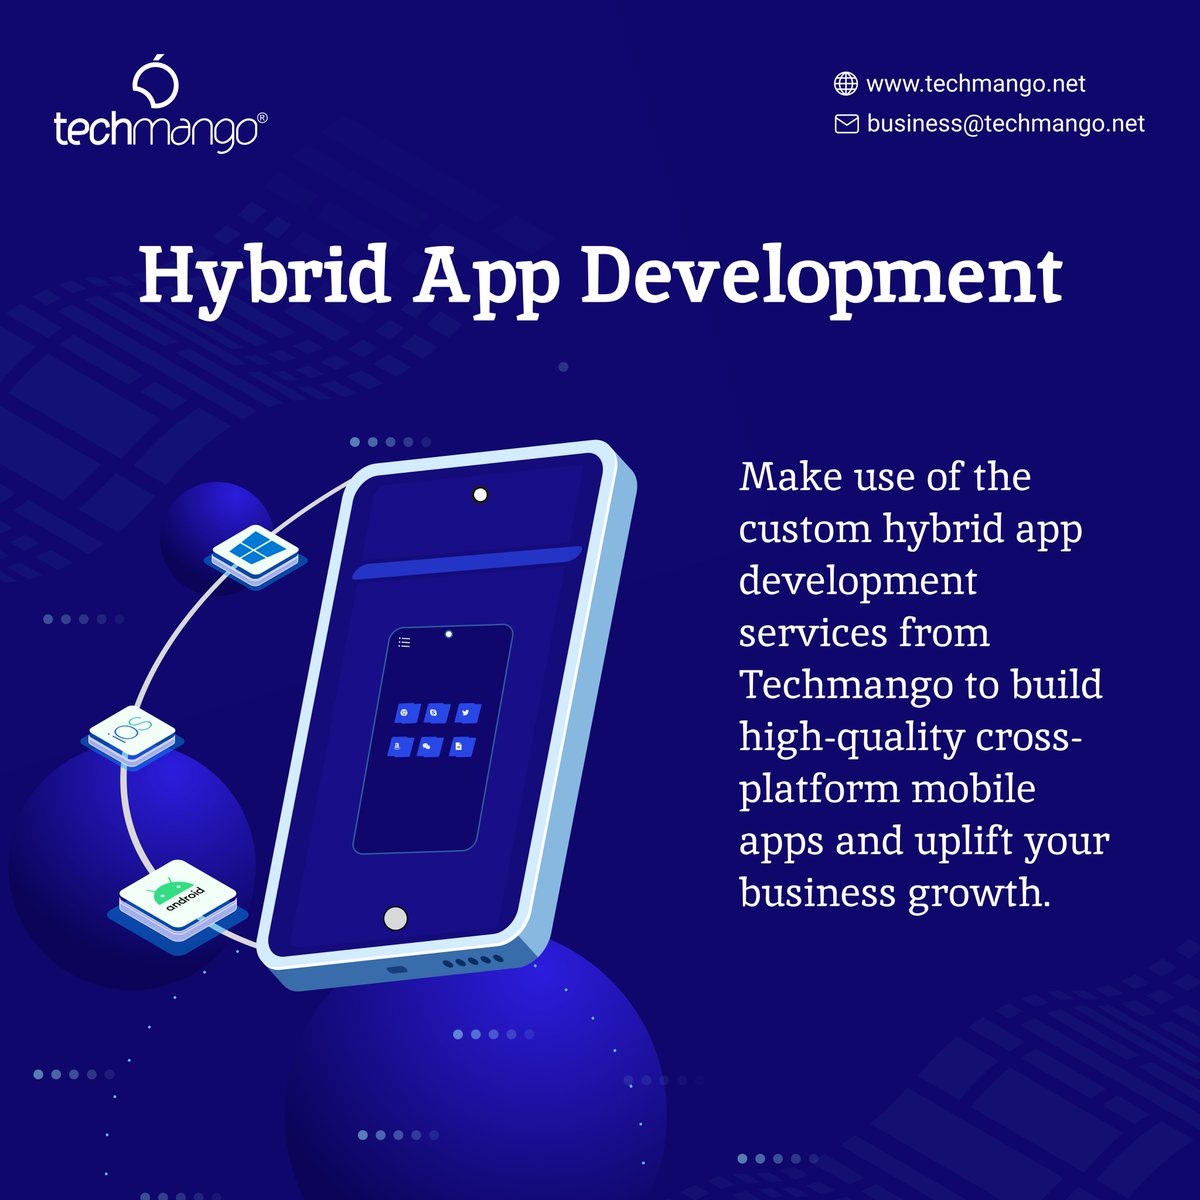 Make use of the #custom hybrid app development services from Techmango to build high-quality cross-platform mobile apps and uplift your #business growth. 👉 bit.ly/3UGkiy5 #HybridAppSolutions #CrossPlatformDevelopment #HybridAppExperts #MobileAppDevelopment #techmango